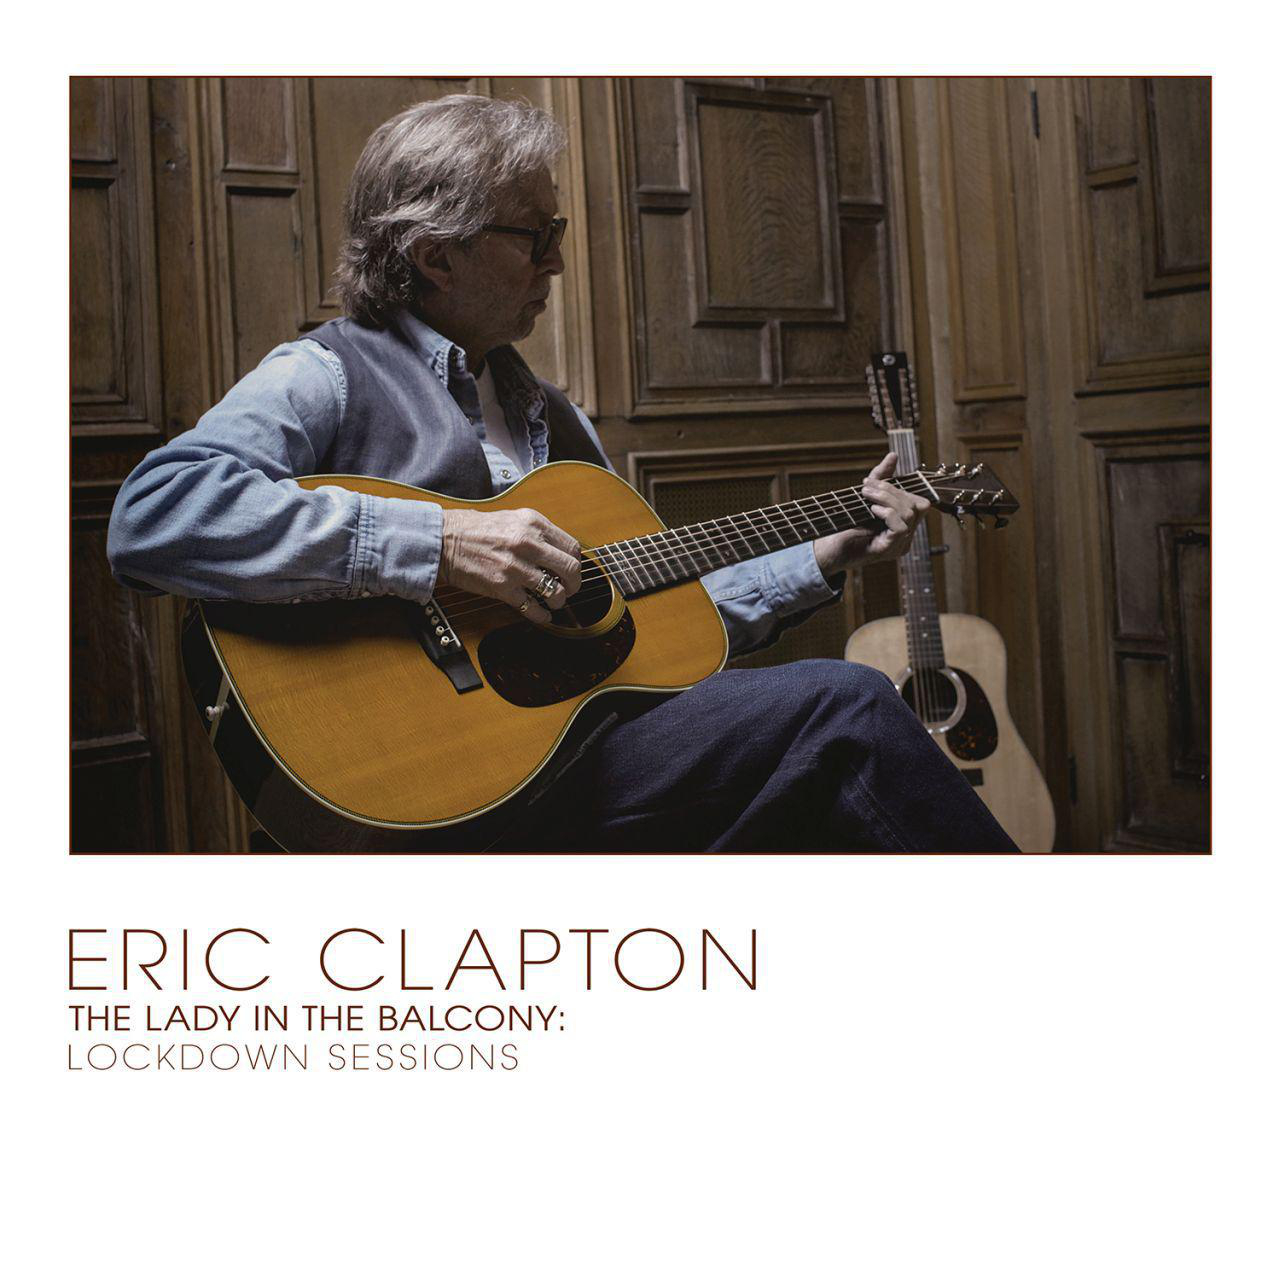 Edition) (CD) Eric Clapton The Sessions Lockdown (Limited Lady In - - Balcony